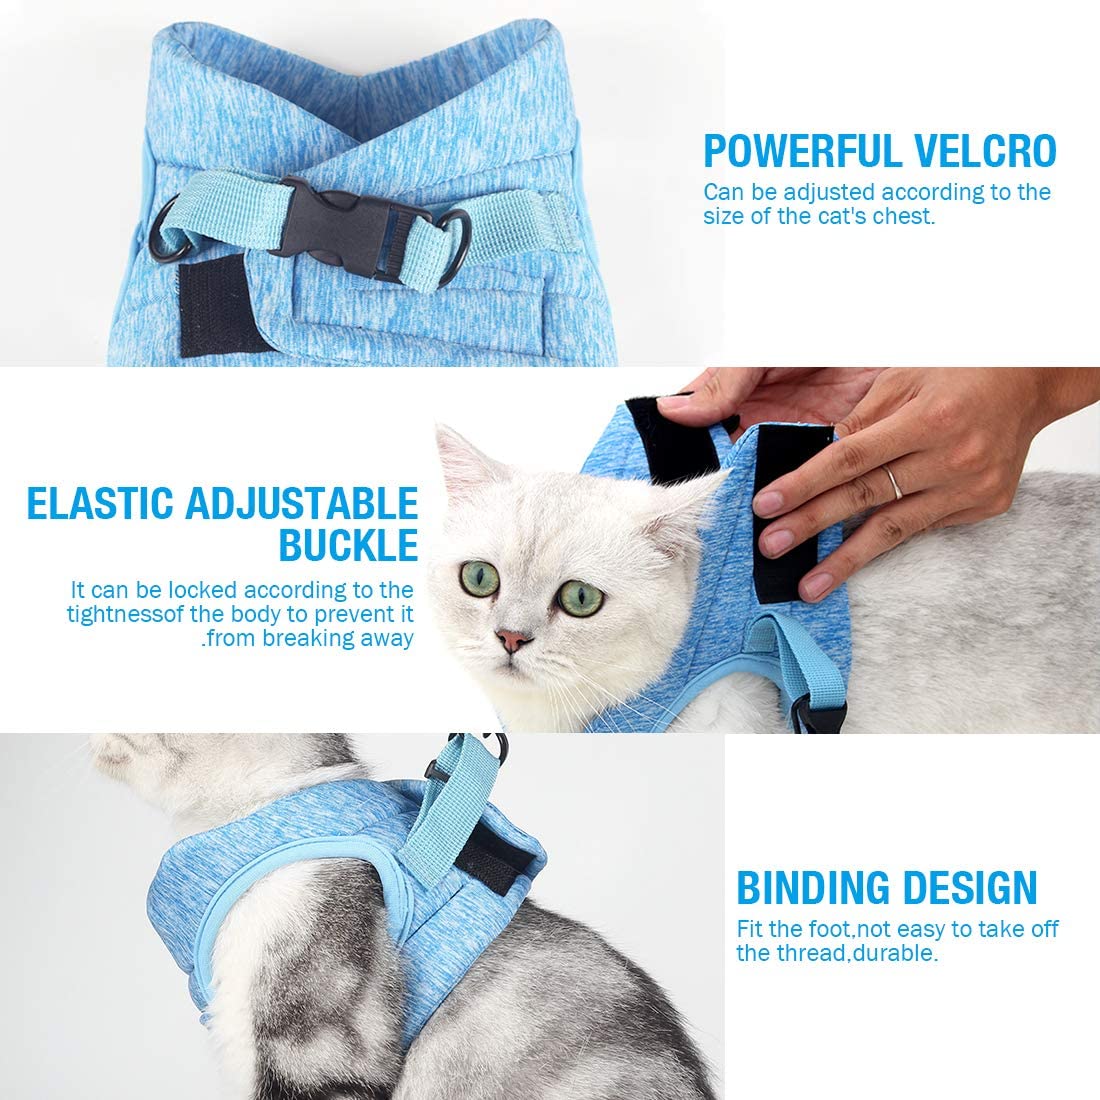 Cat Harness and Leash Set for Walking 360° wrap-Around Small Cat and Dog Harness - e4cents